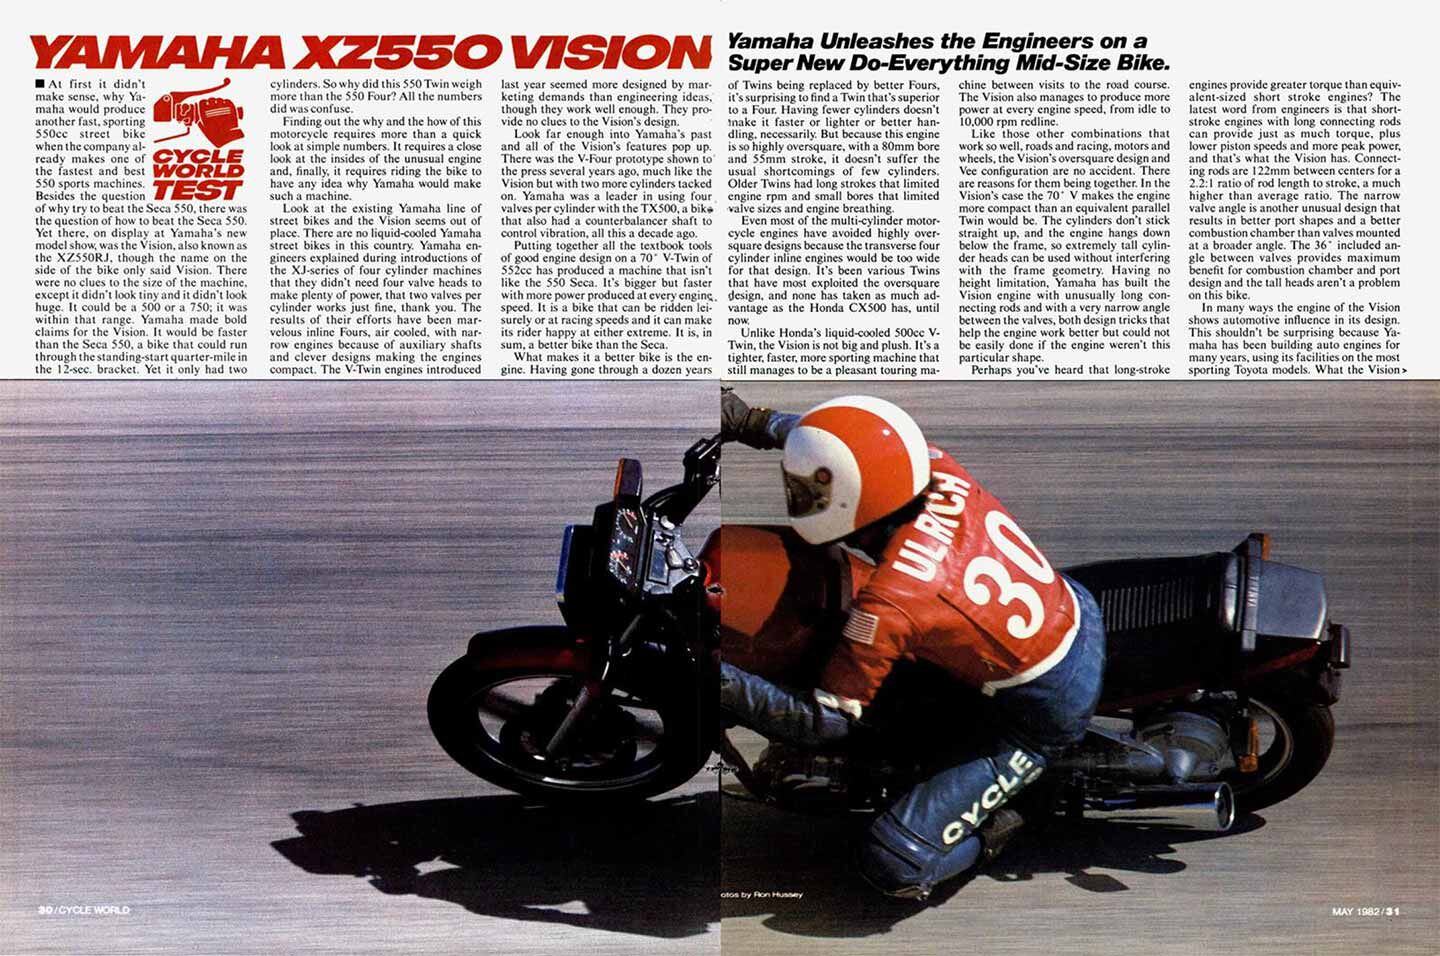 Never mind the gutter: <i>Cycle World</i> gives the Yamaha XZ550 Vision its glamor shot in good old-fashioned print.